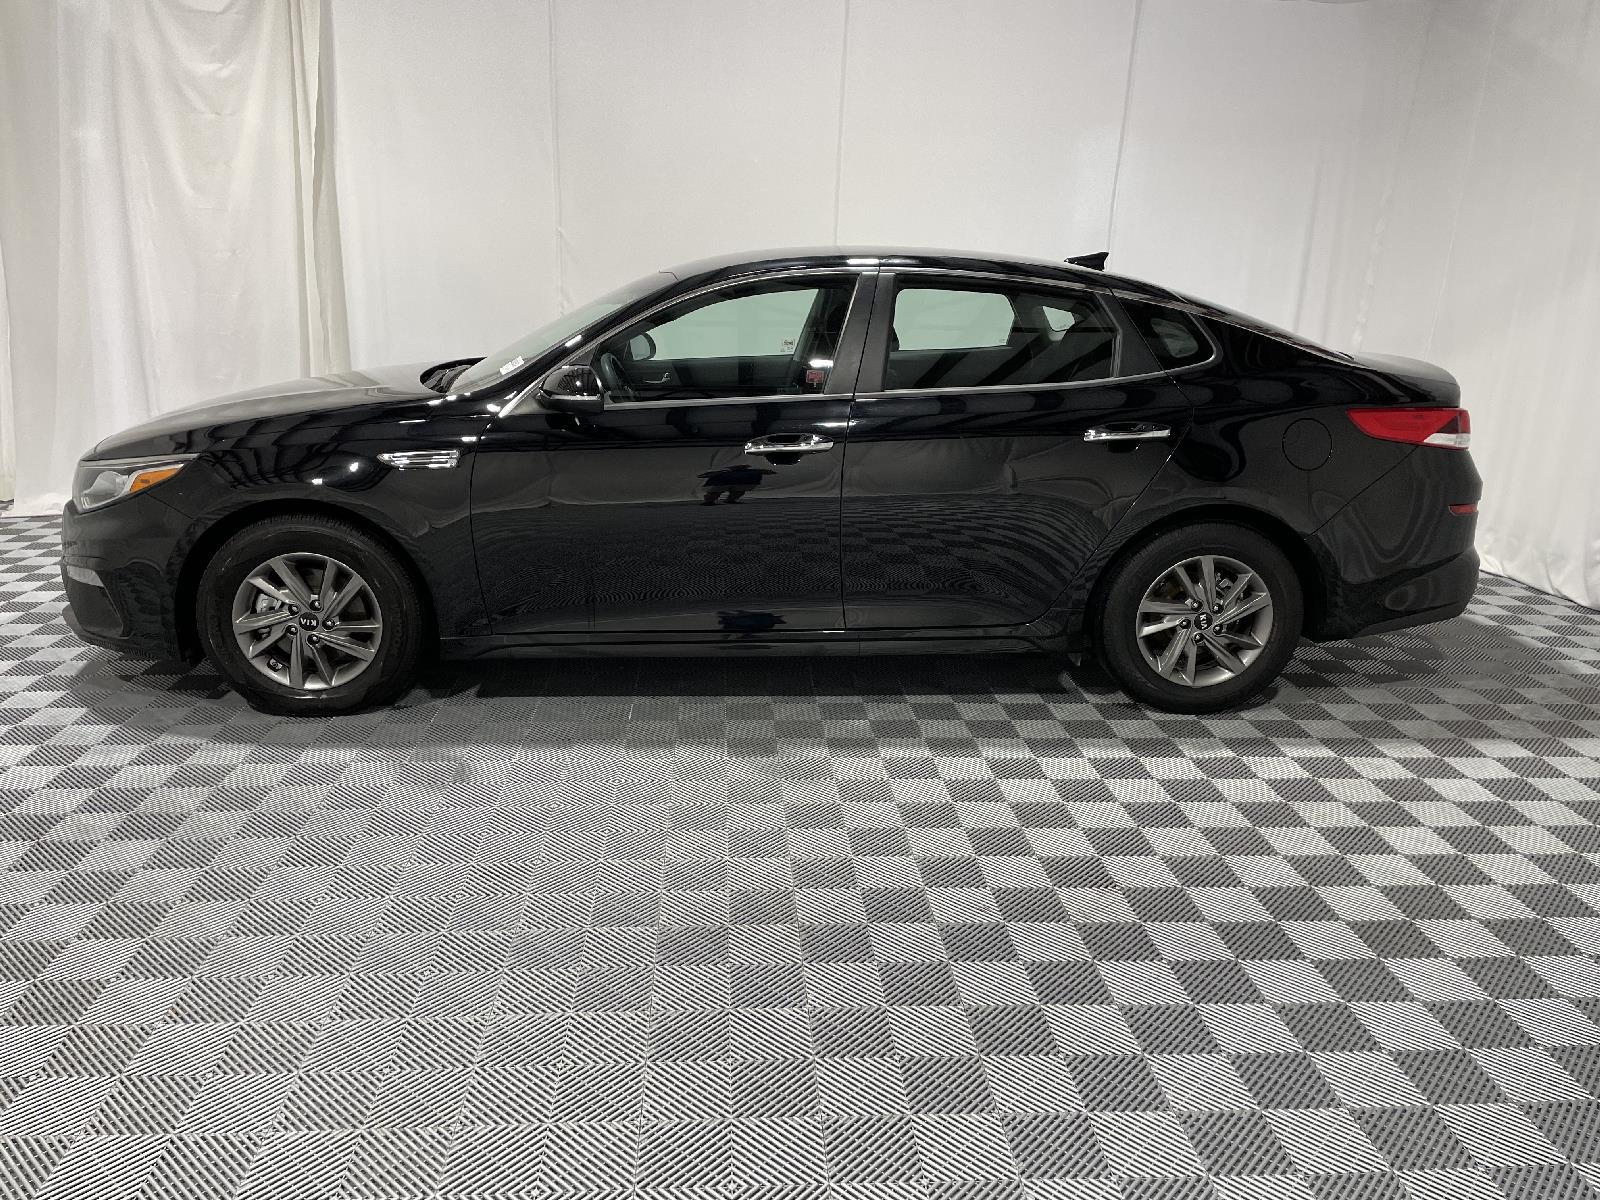 Used 2020 Kia Optima LX with VIN 5XXGT4L3XLG451121 for sale in Saint Joseph, MO